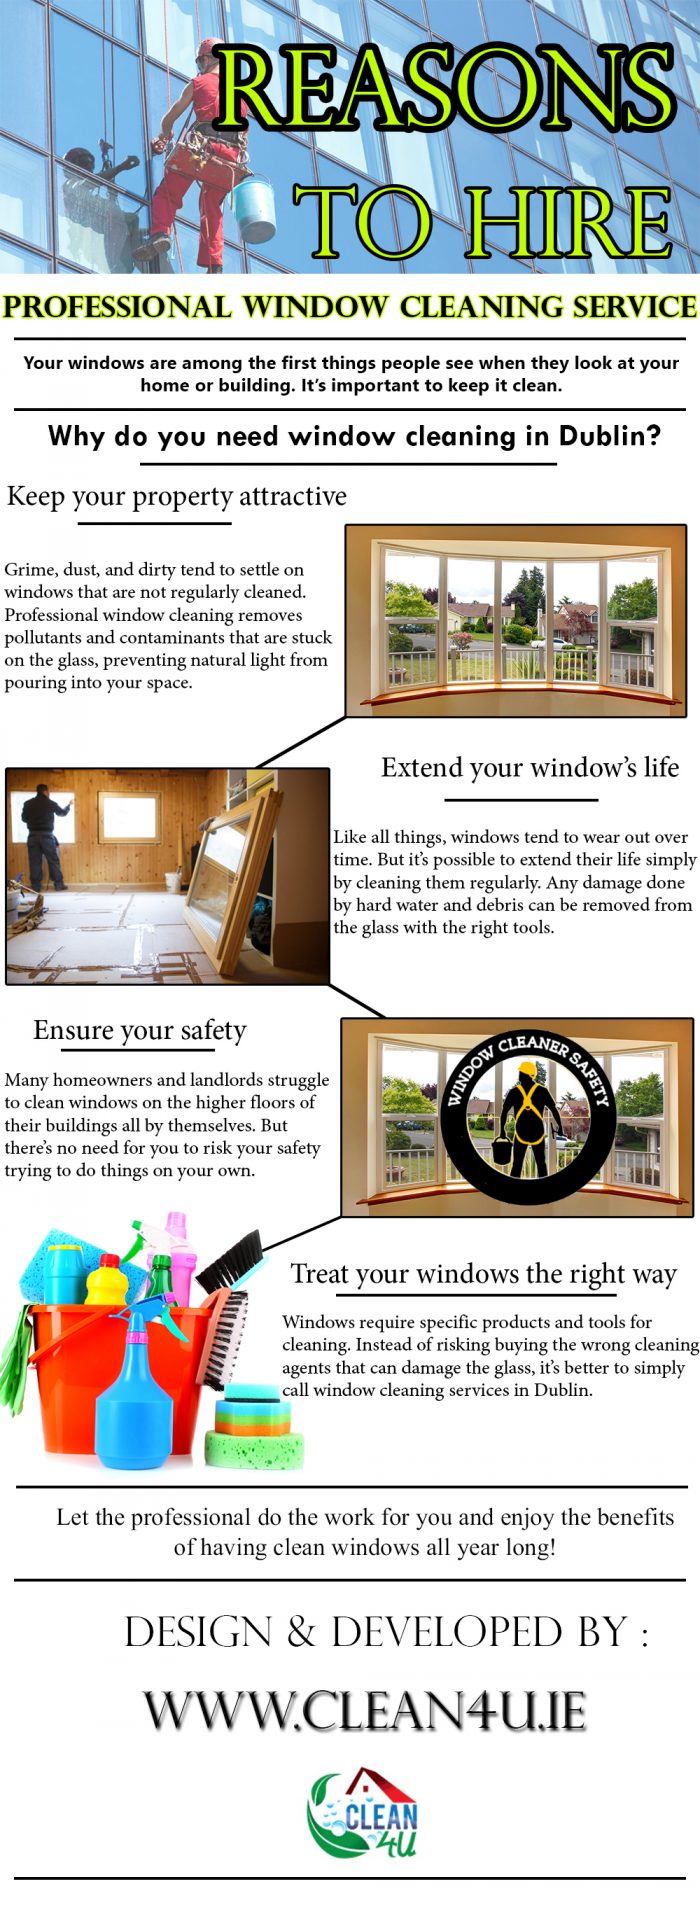 Reasons to Hire a Professional Window Cleaning Service